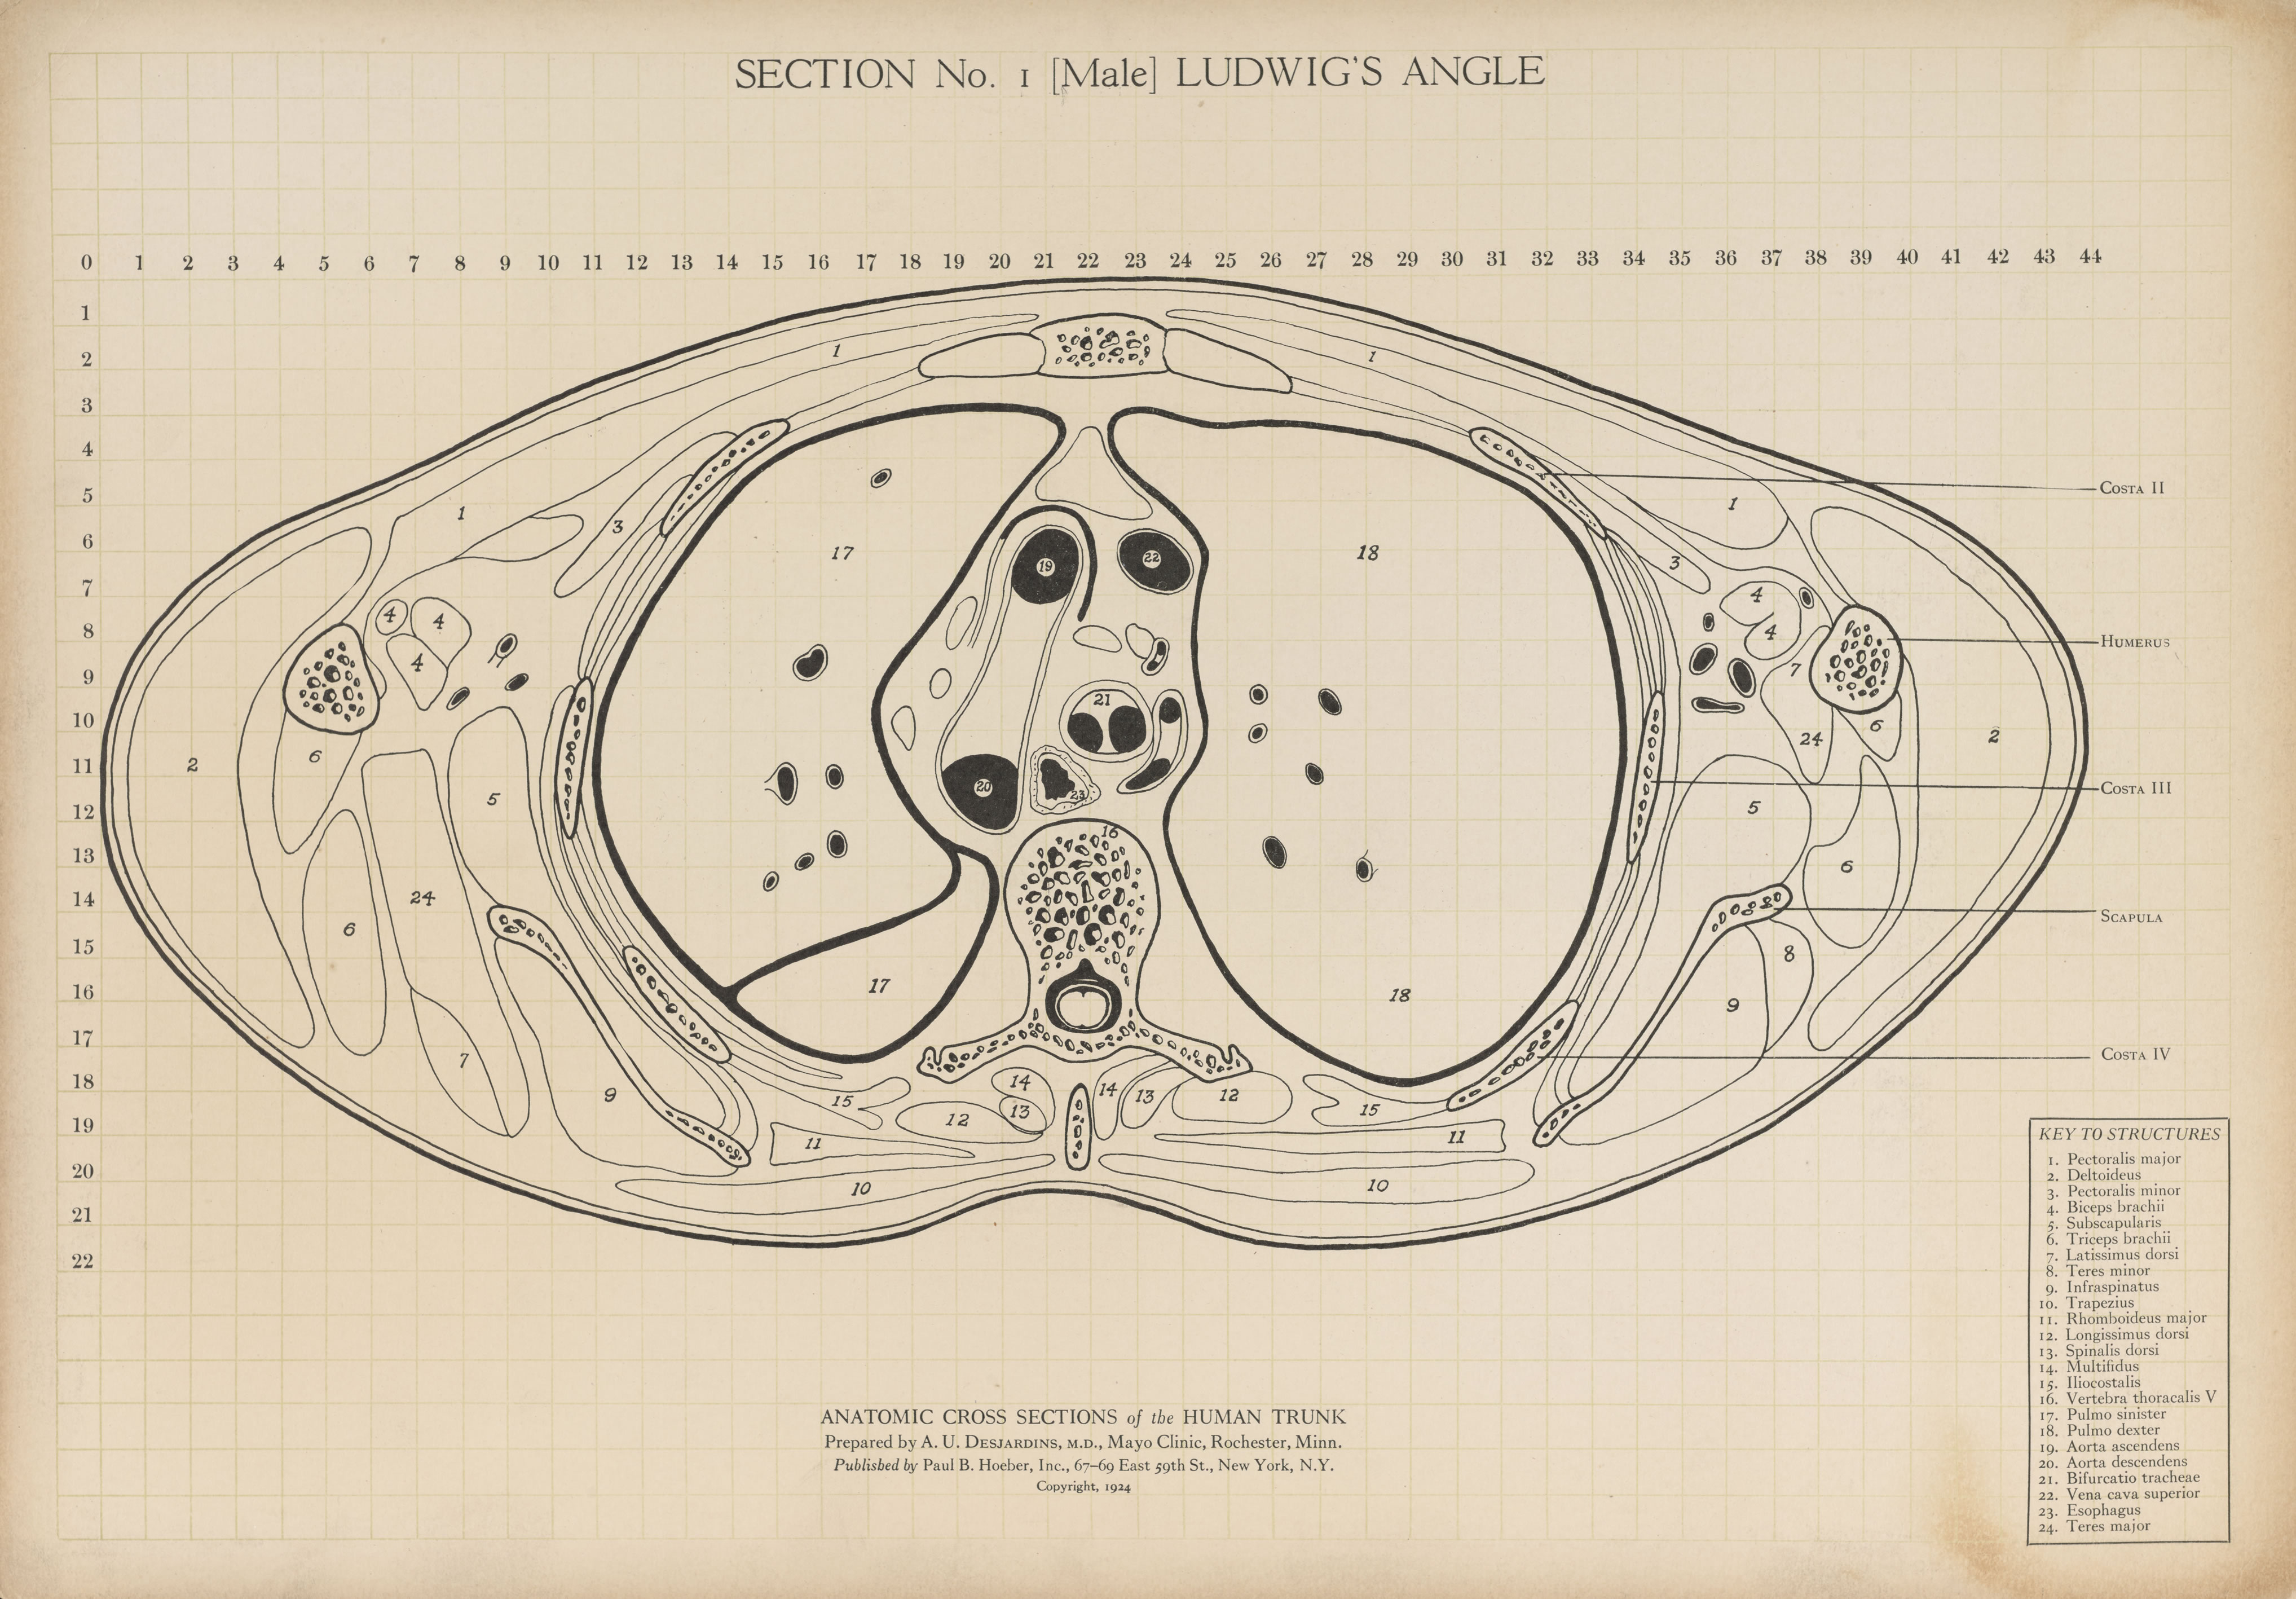 Anatomic cross section charts of the human trunk (life size)